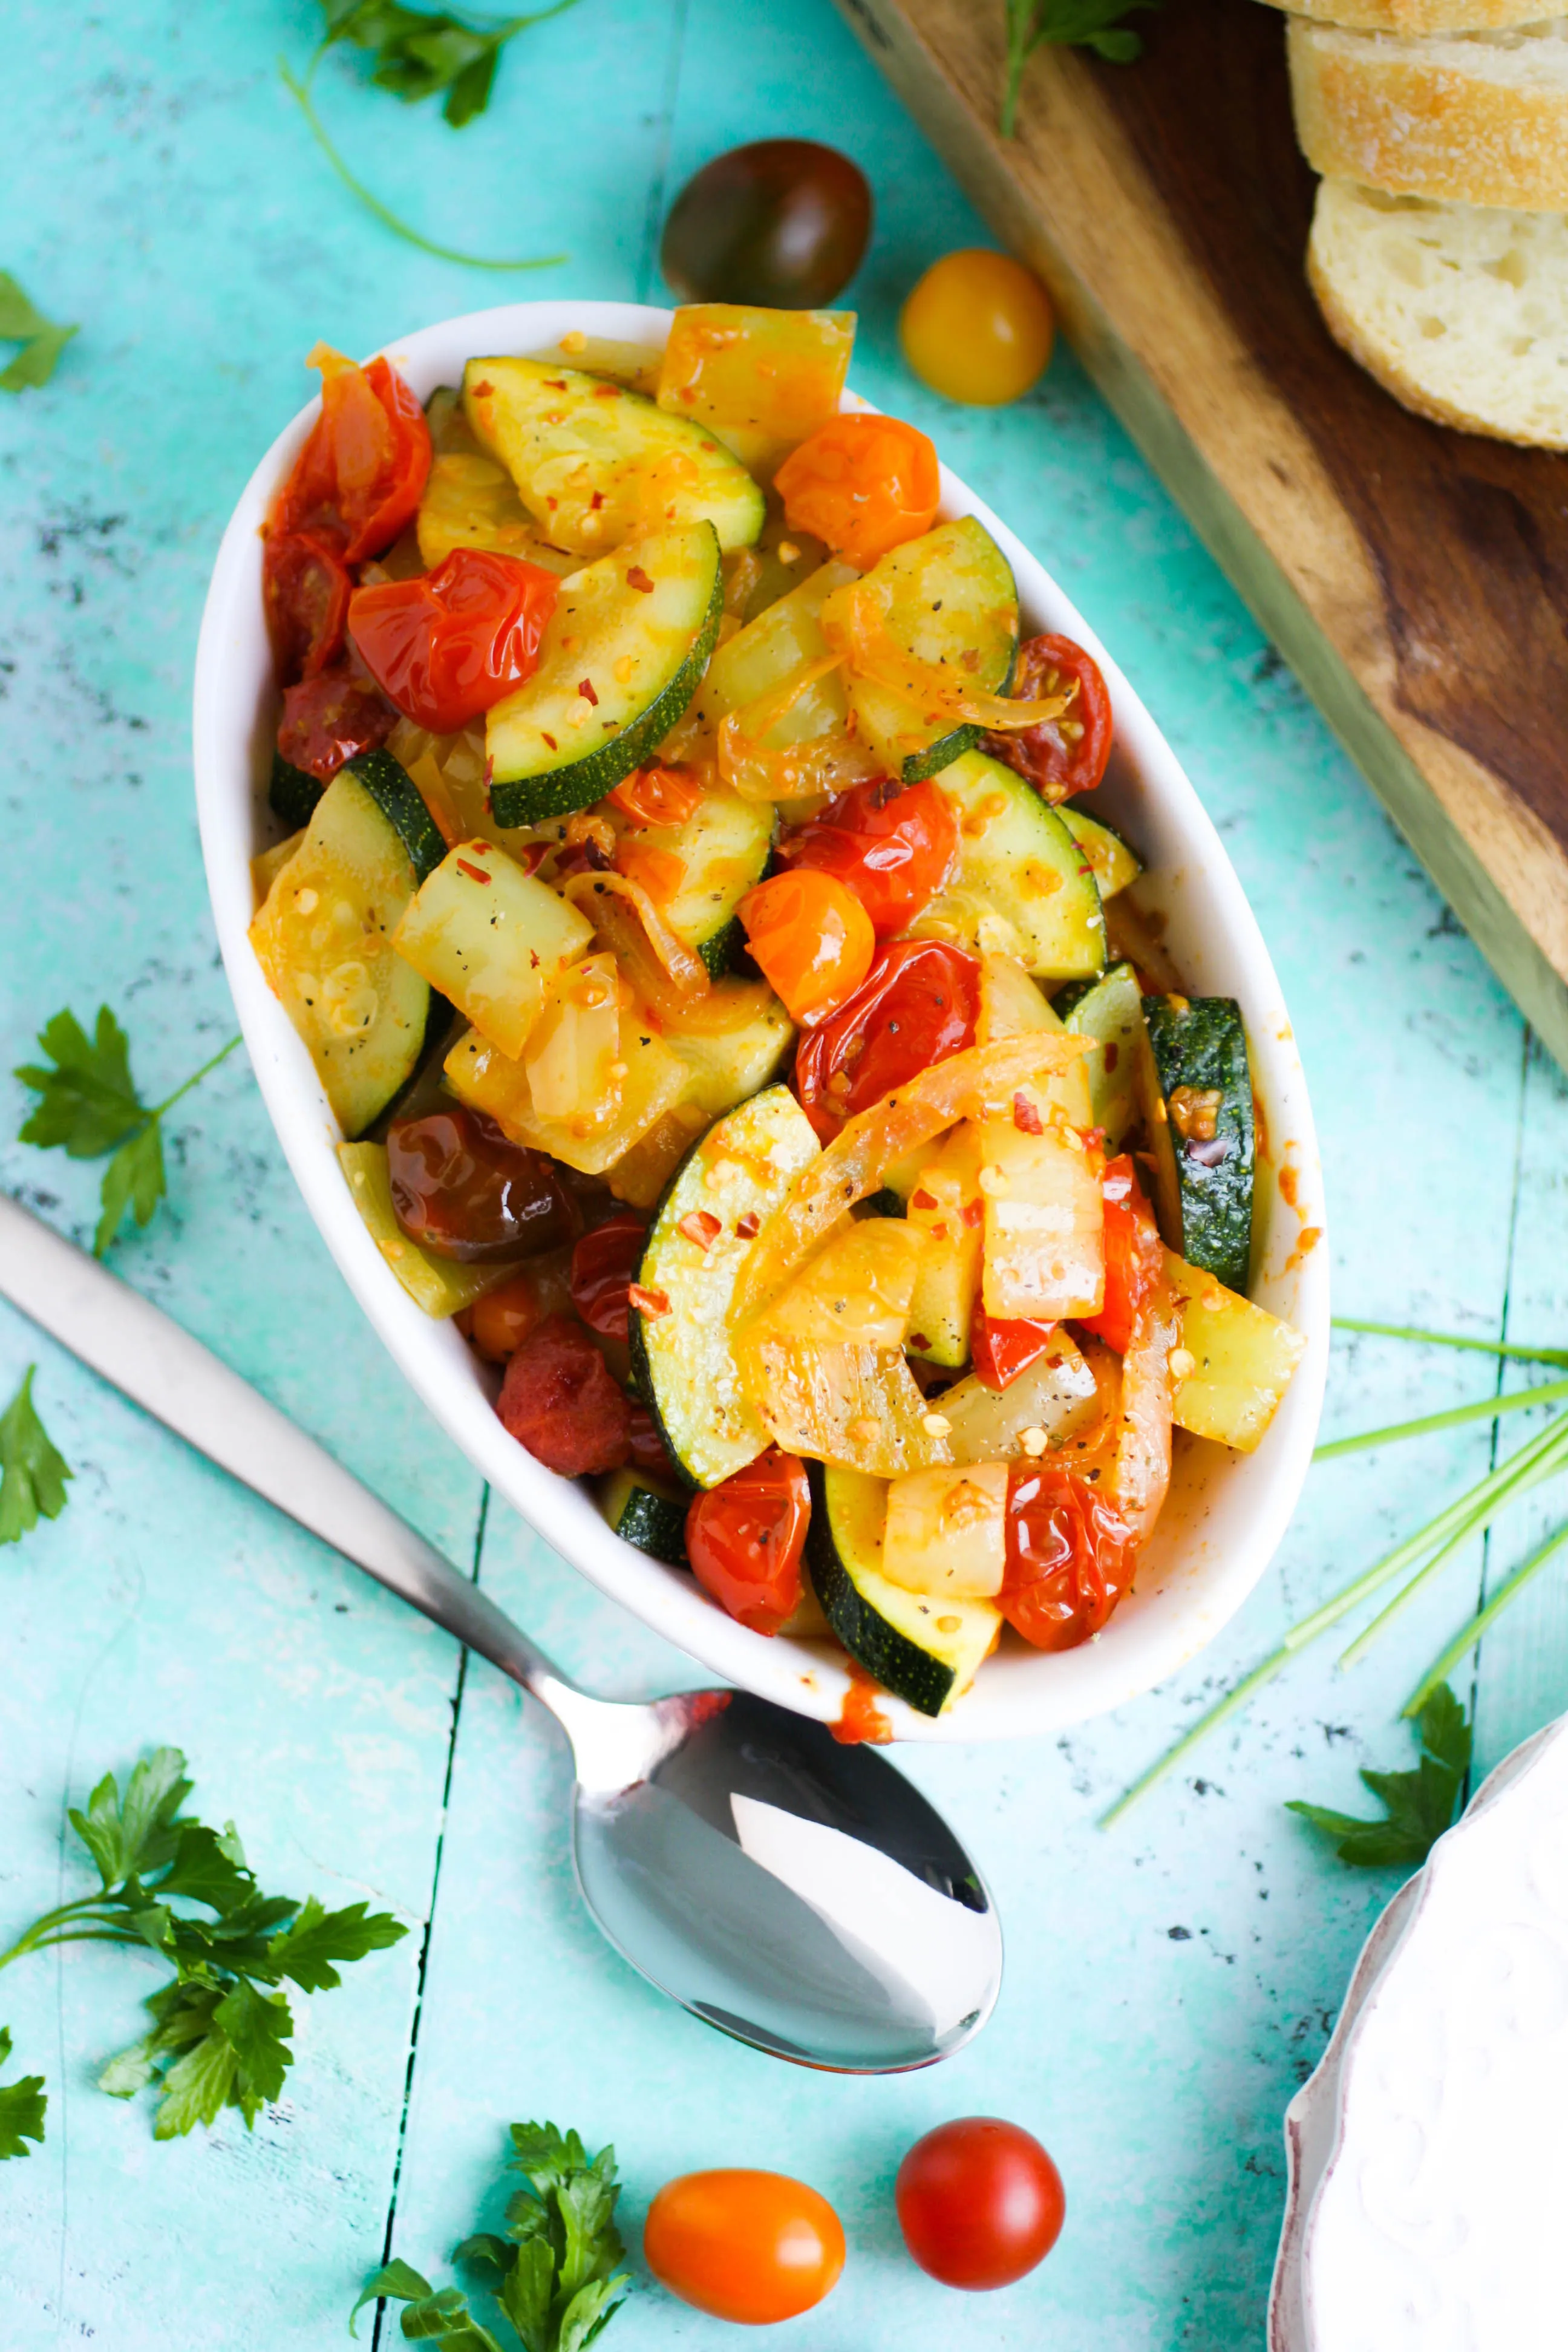 Farmers Market Find: Sautéed Peppers, Tomatoes & Zucchini is what you need to make this summer for a flavorful side dish. Farmers Market Find: Sautéed Peppers, Tomatoes & Zucchini is a tasty side dish or appetizer for the season.